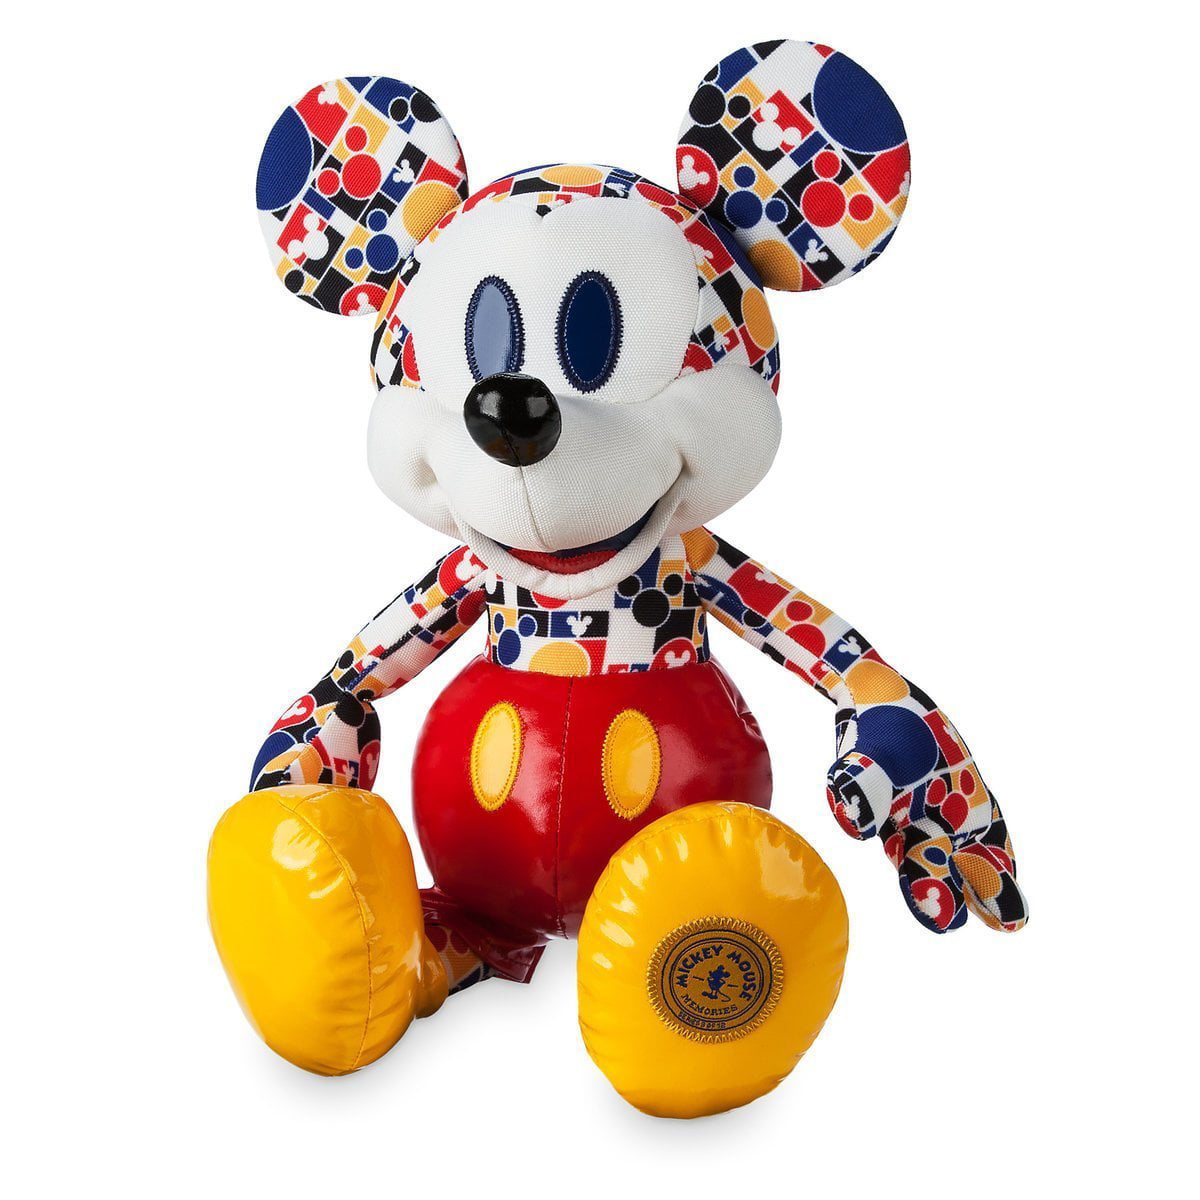 Details about   NEW DISNEY Store Mickey Mouse Memories August Plush